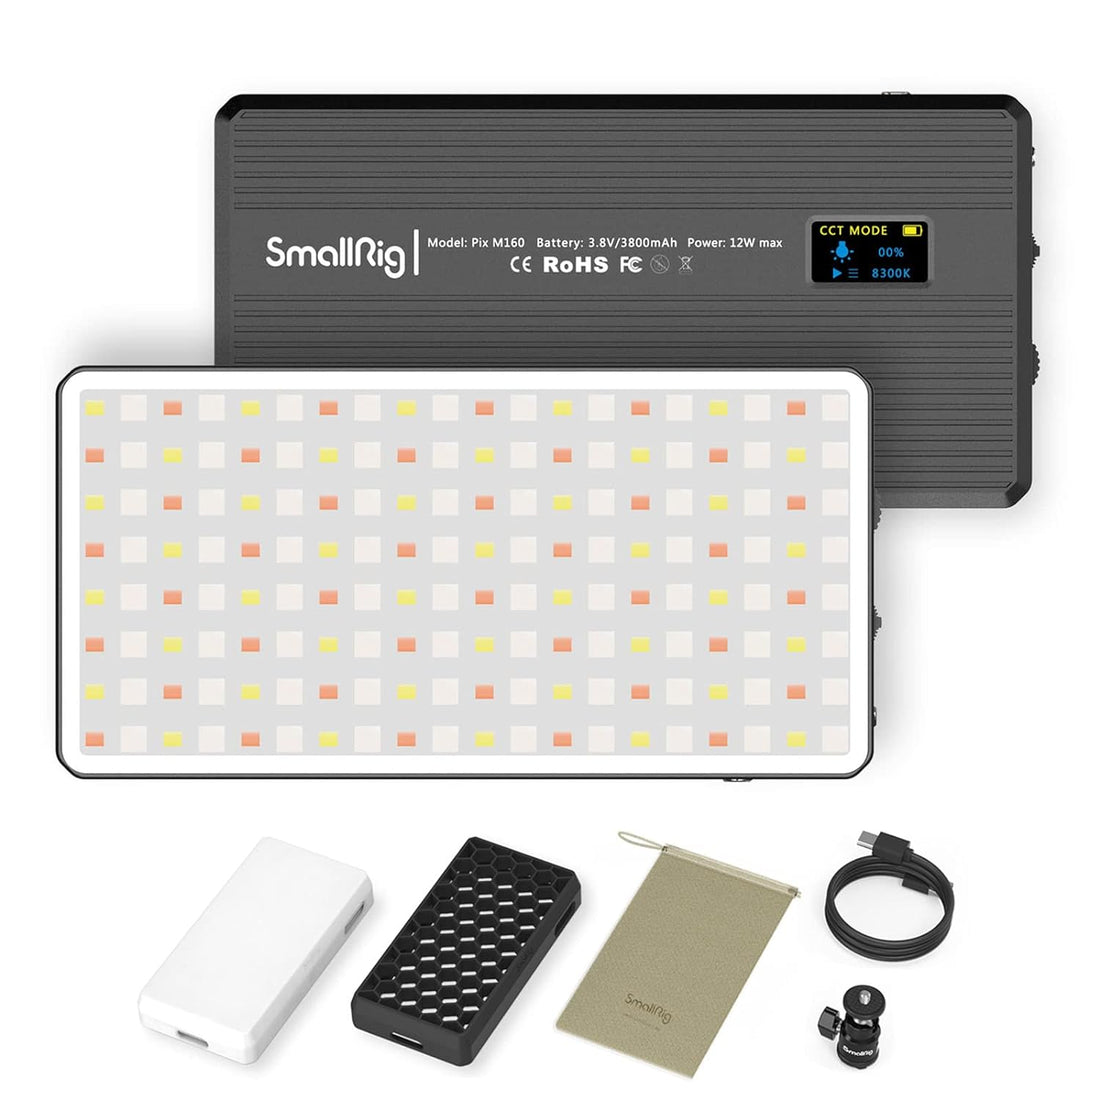 SmallRig M160 RGB Camera Video Light Panel, w/ 3800mh Battery, 360° Full Color 12 Light Effects CRI 95+, 0%-100% Dimmable Bright, 160 LED Beads for Zoom, Conference, Photography, Aluminum Body - 3157